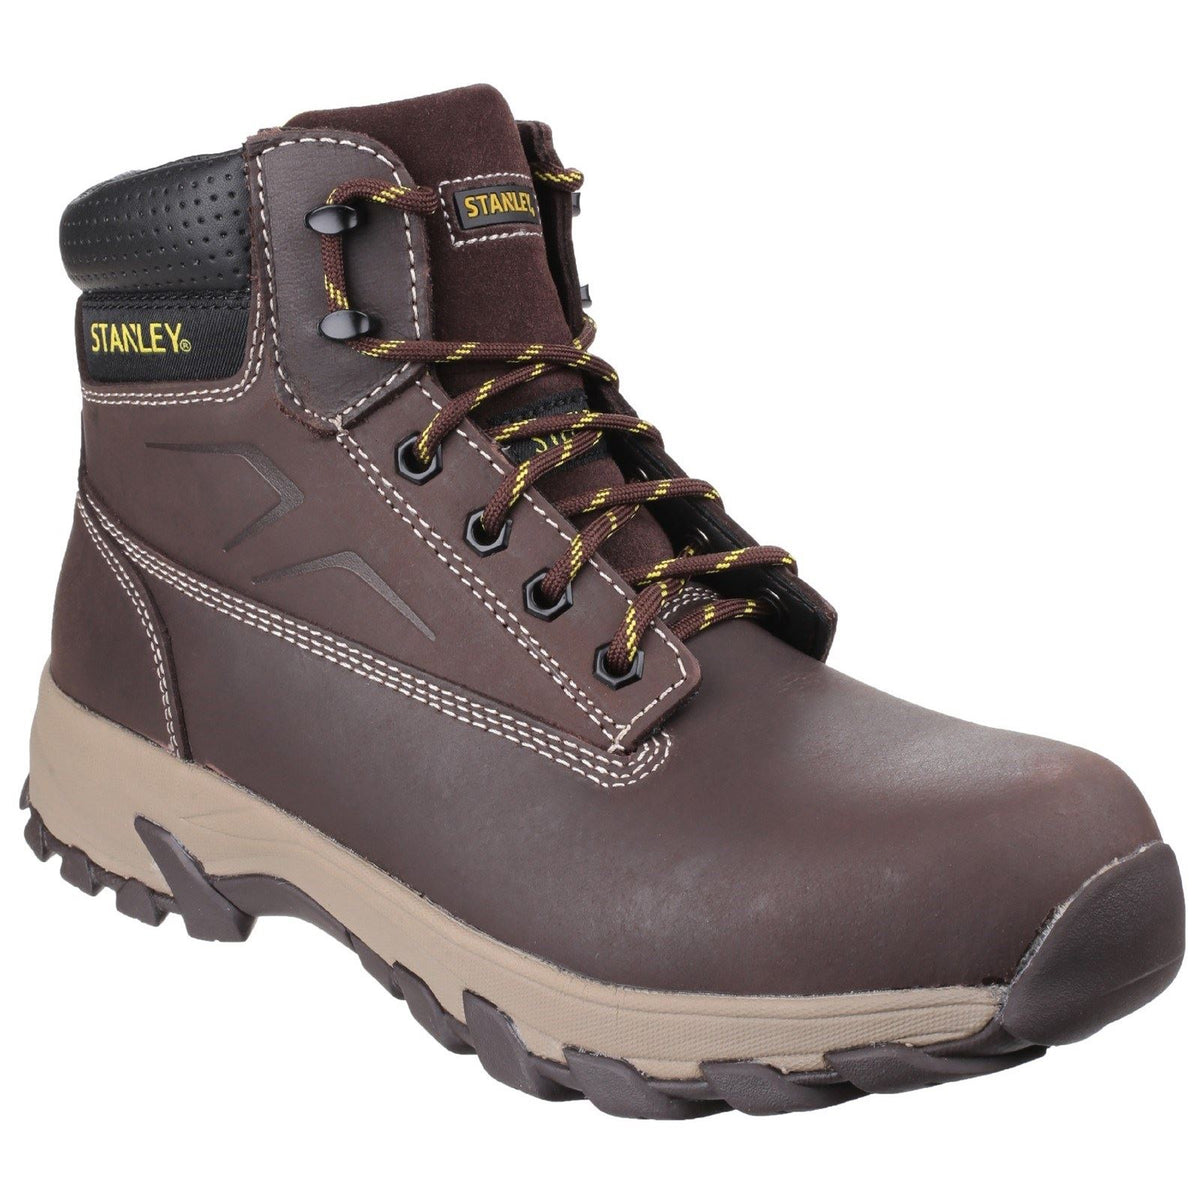 Stanley Tradesman Safety Boots STA10025-104